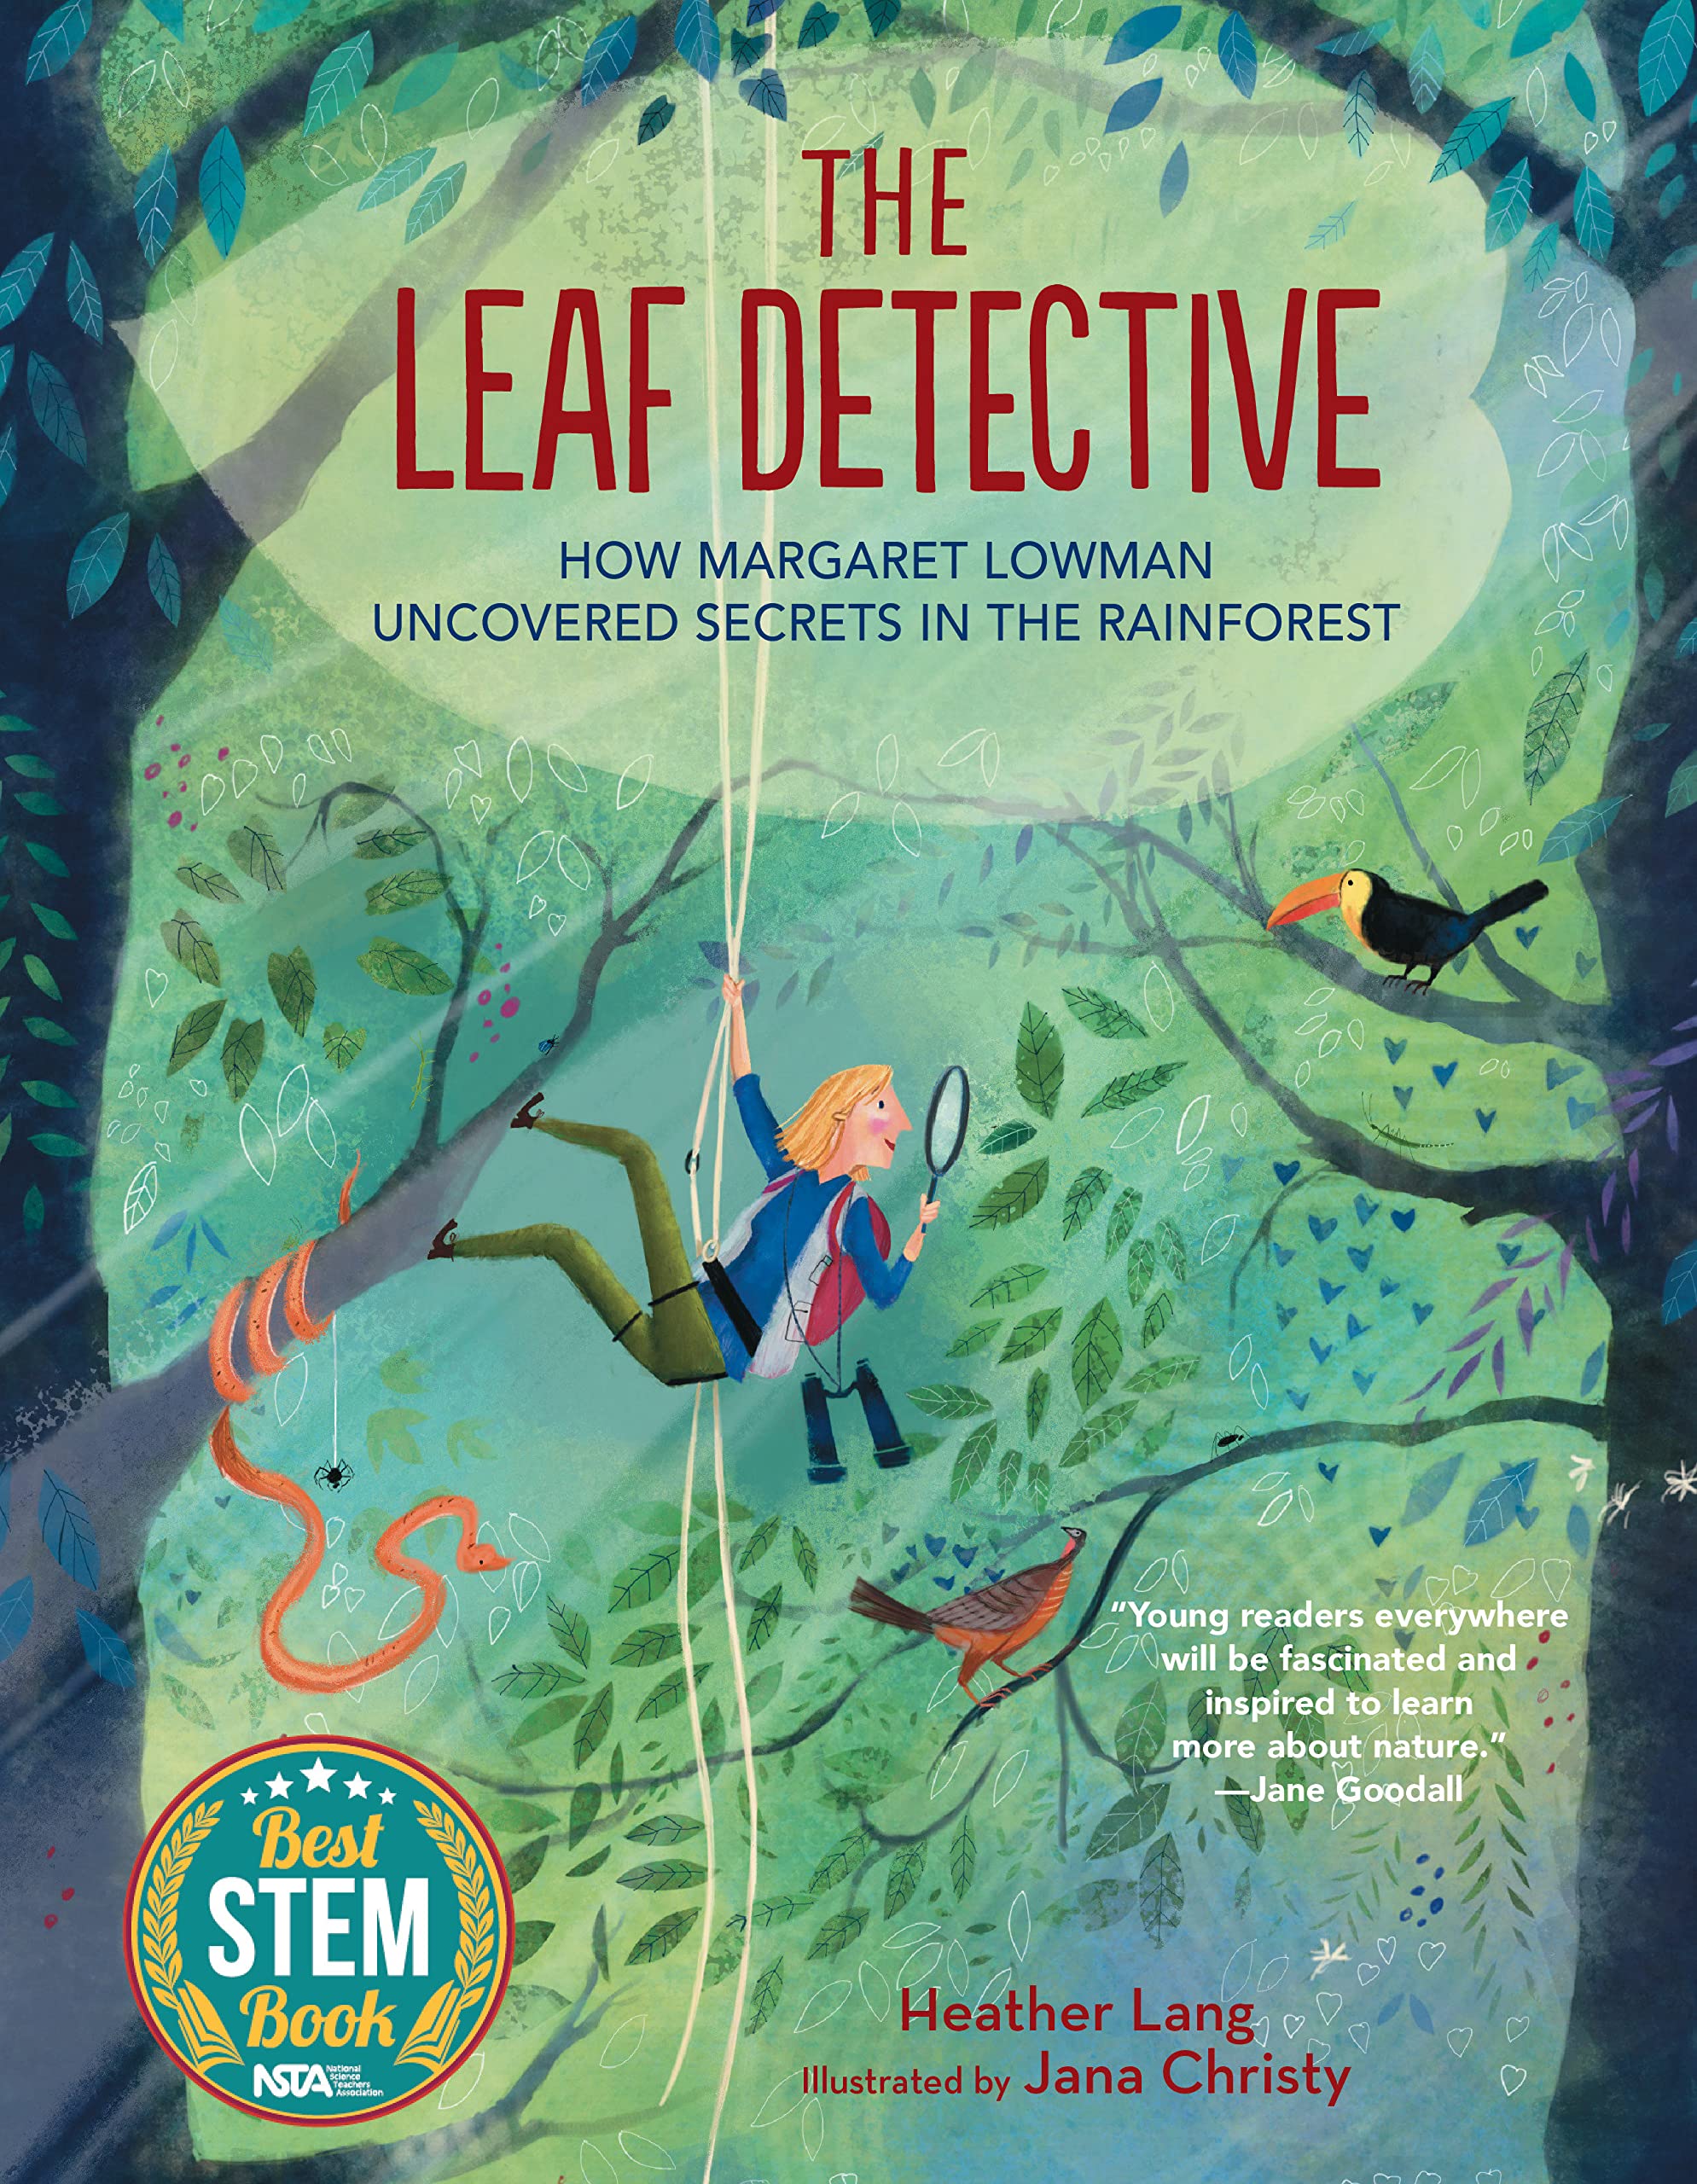 speech and language teaching concepts for The Leaf Detective in speech therapy​ ​